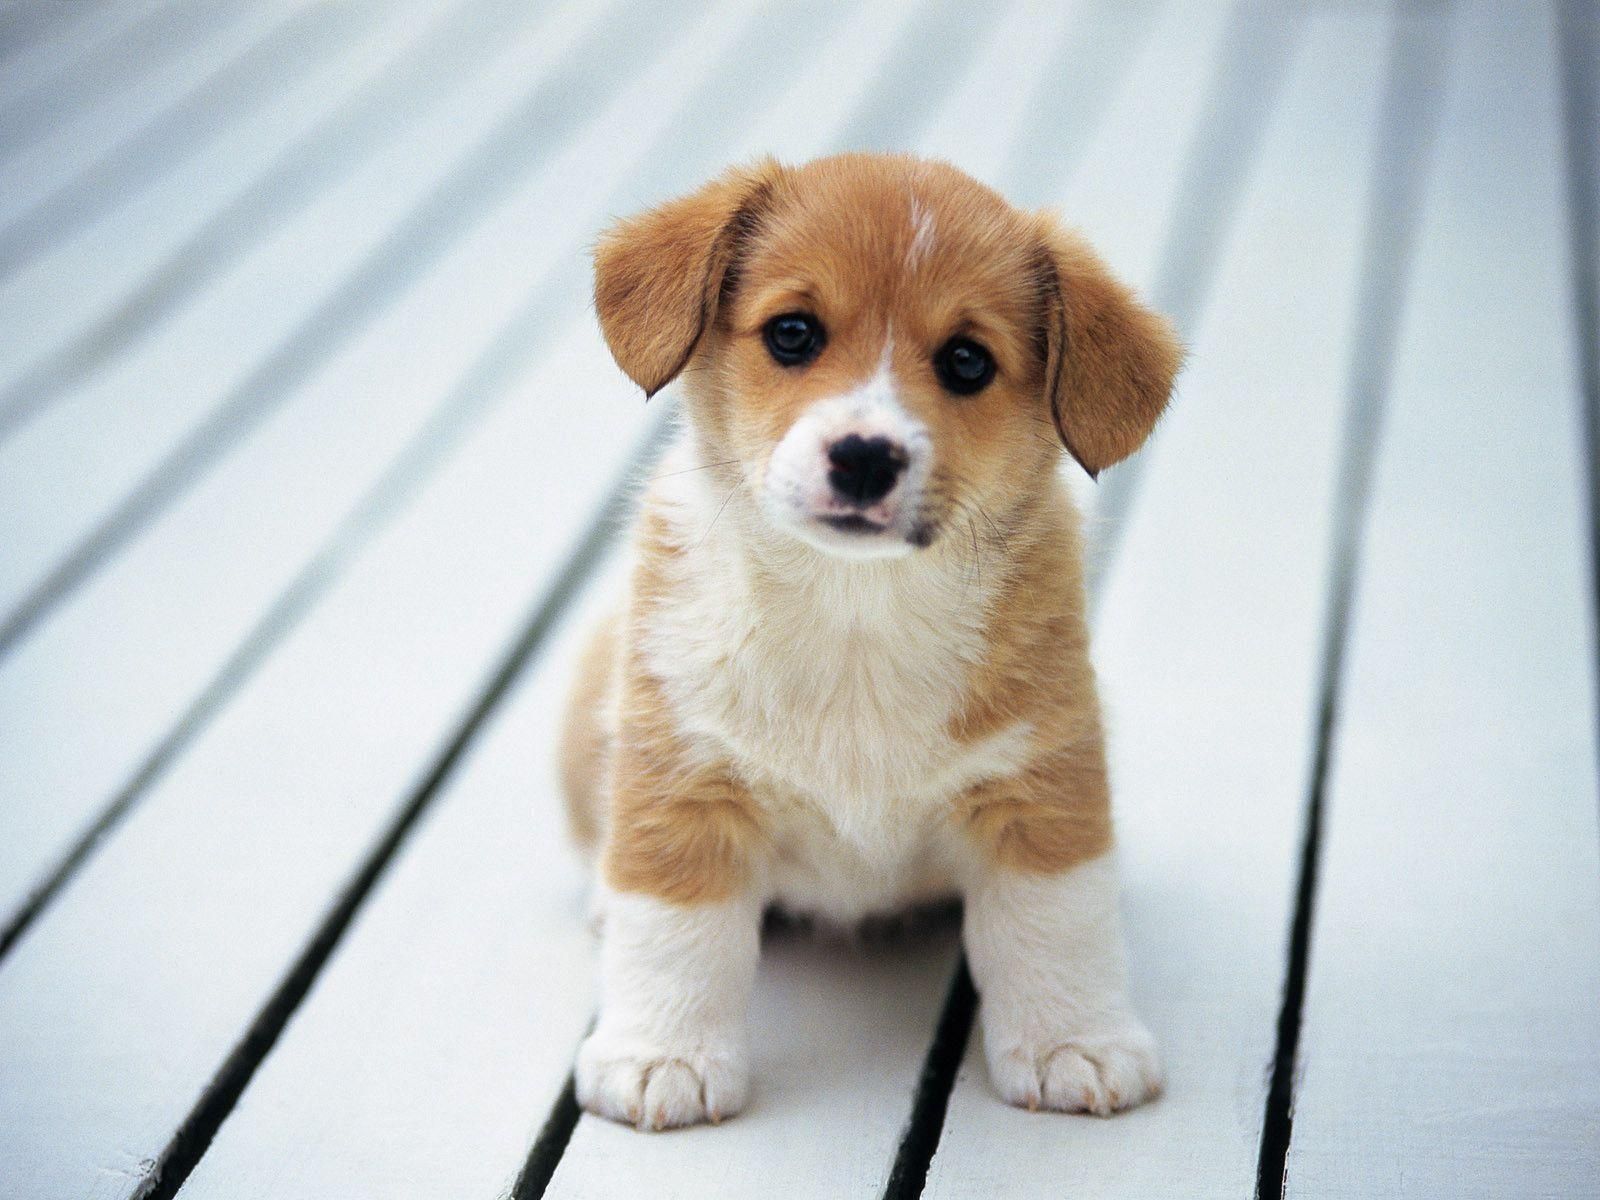 Cute Dog Wallpapers on WallpaperDog